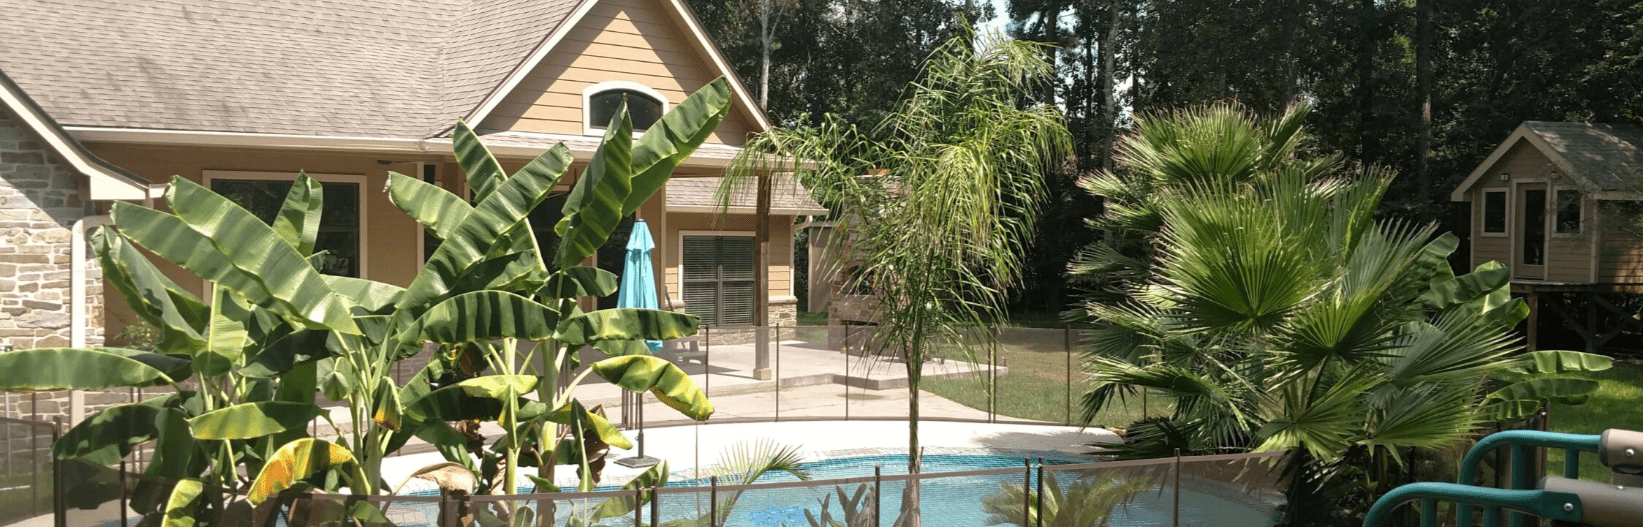 install a pool fence with landscape